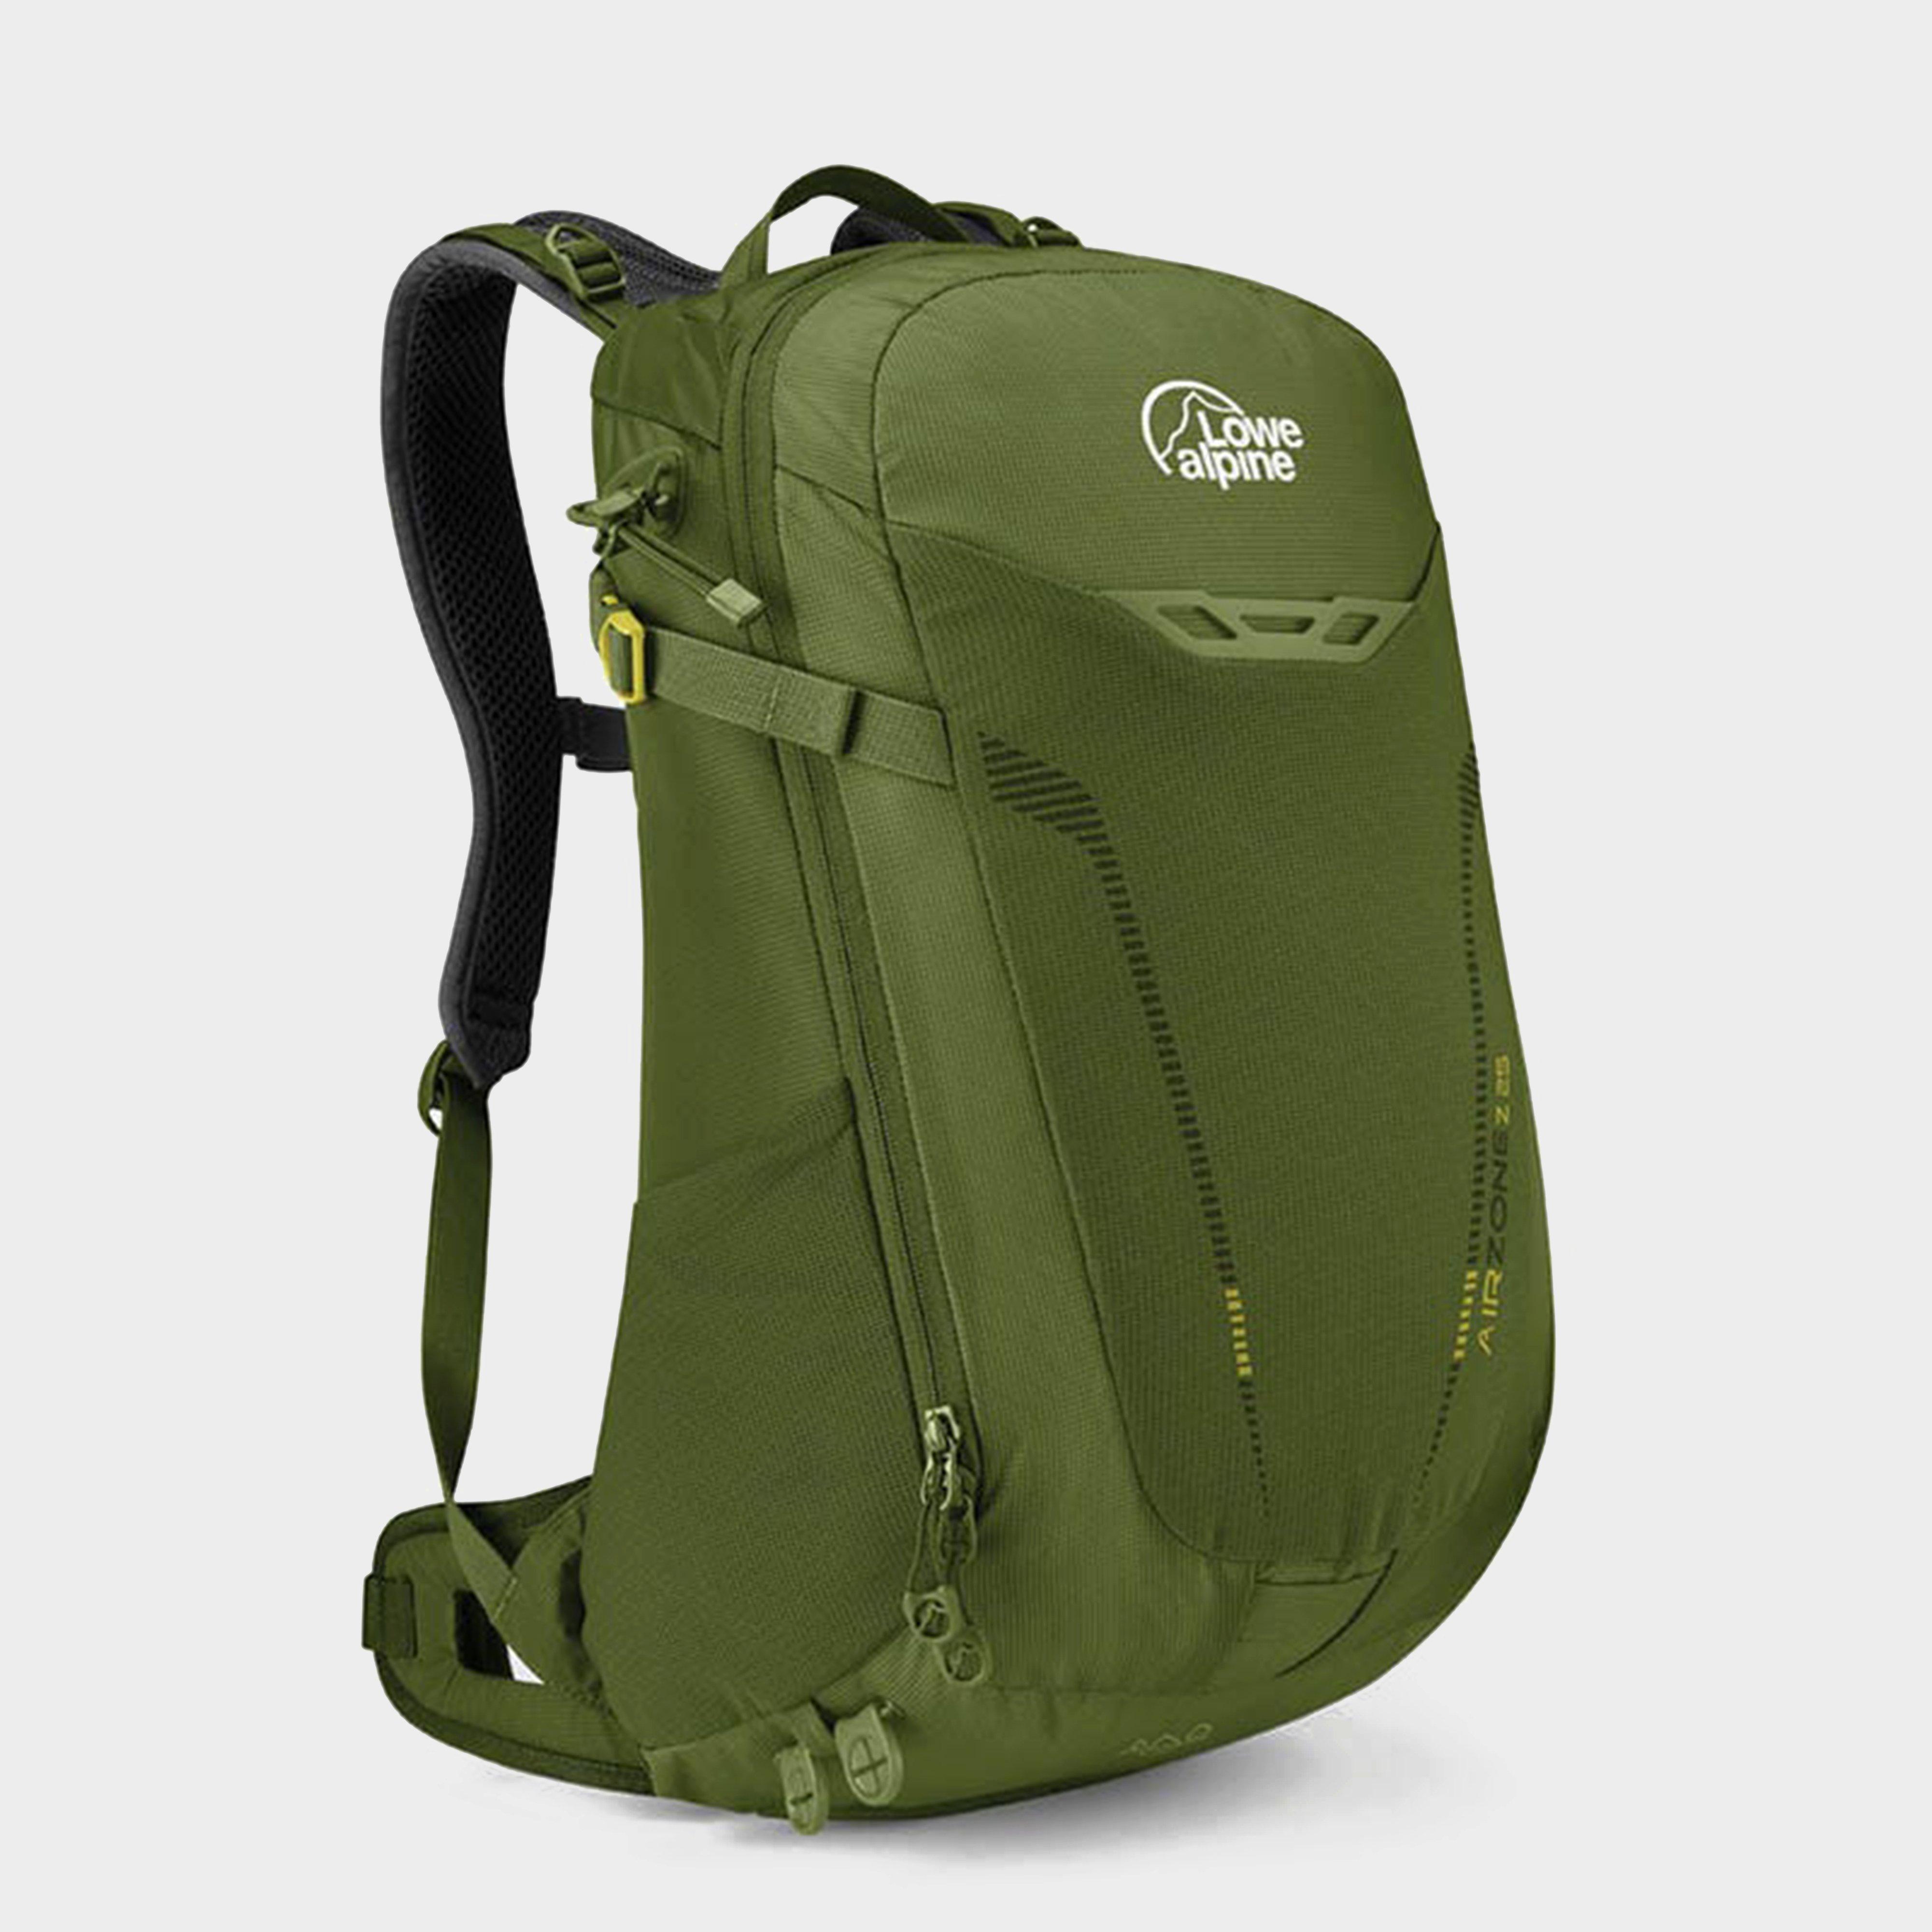 Lowe Alpine Airzone 18 Litre Daysack - Green/green  Green/green